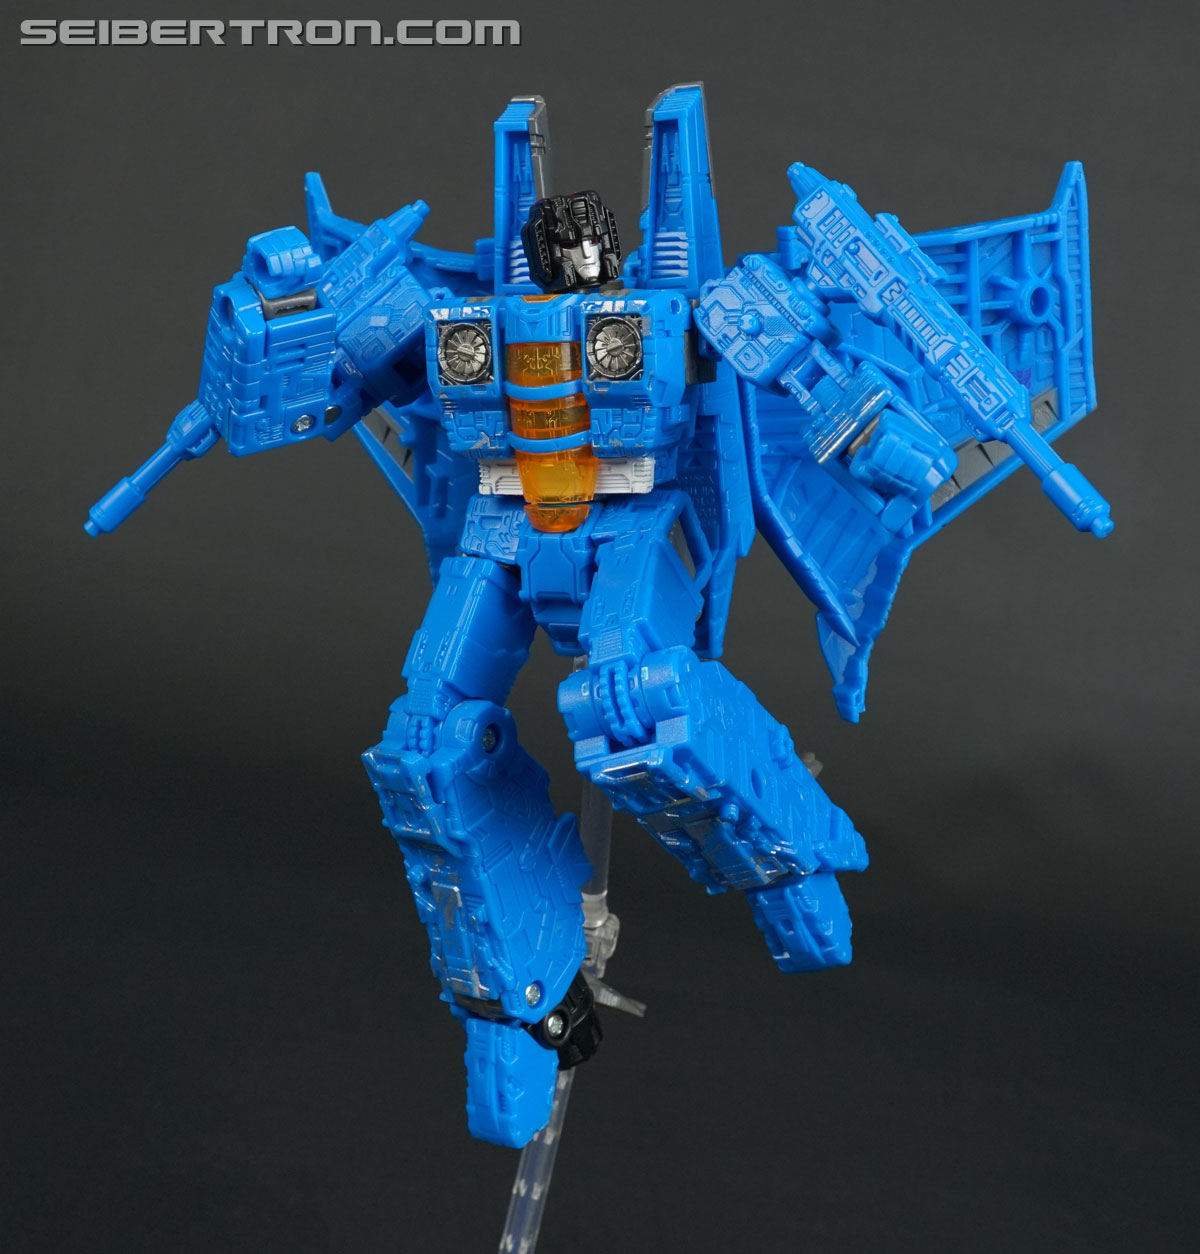 Transformers War for Cybertron: SIEGE Ion Storm (Seeker Ion Storm) (Image #85 of 111)